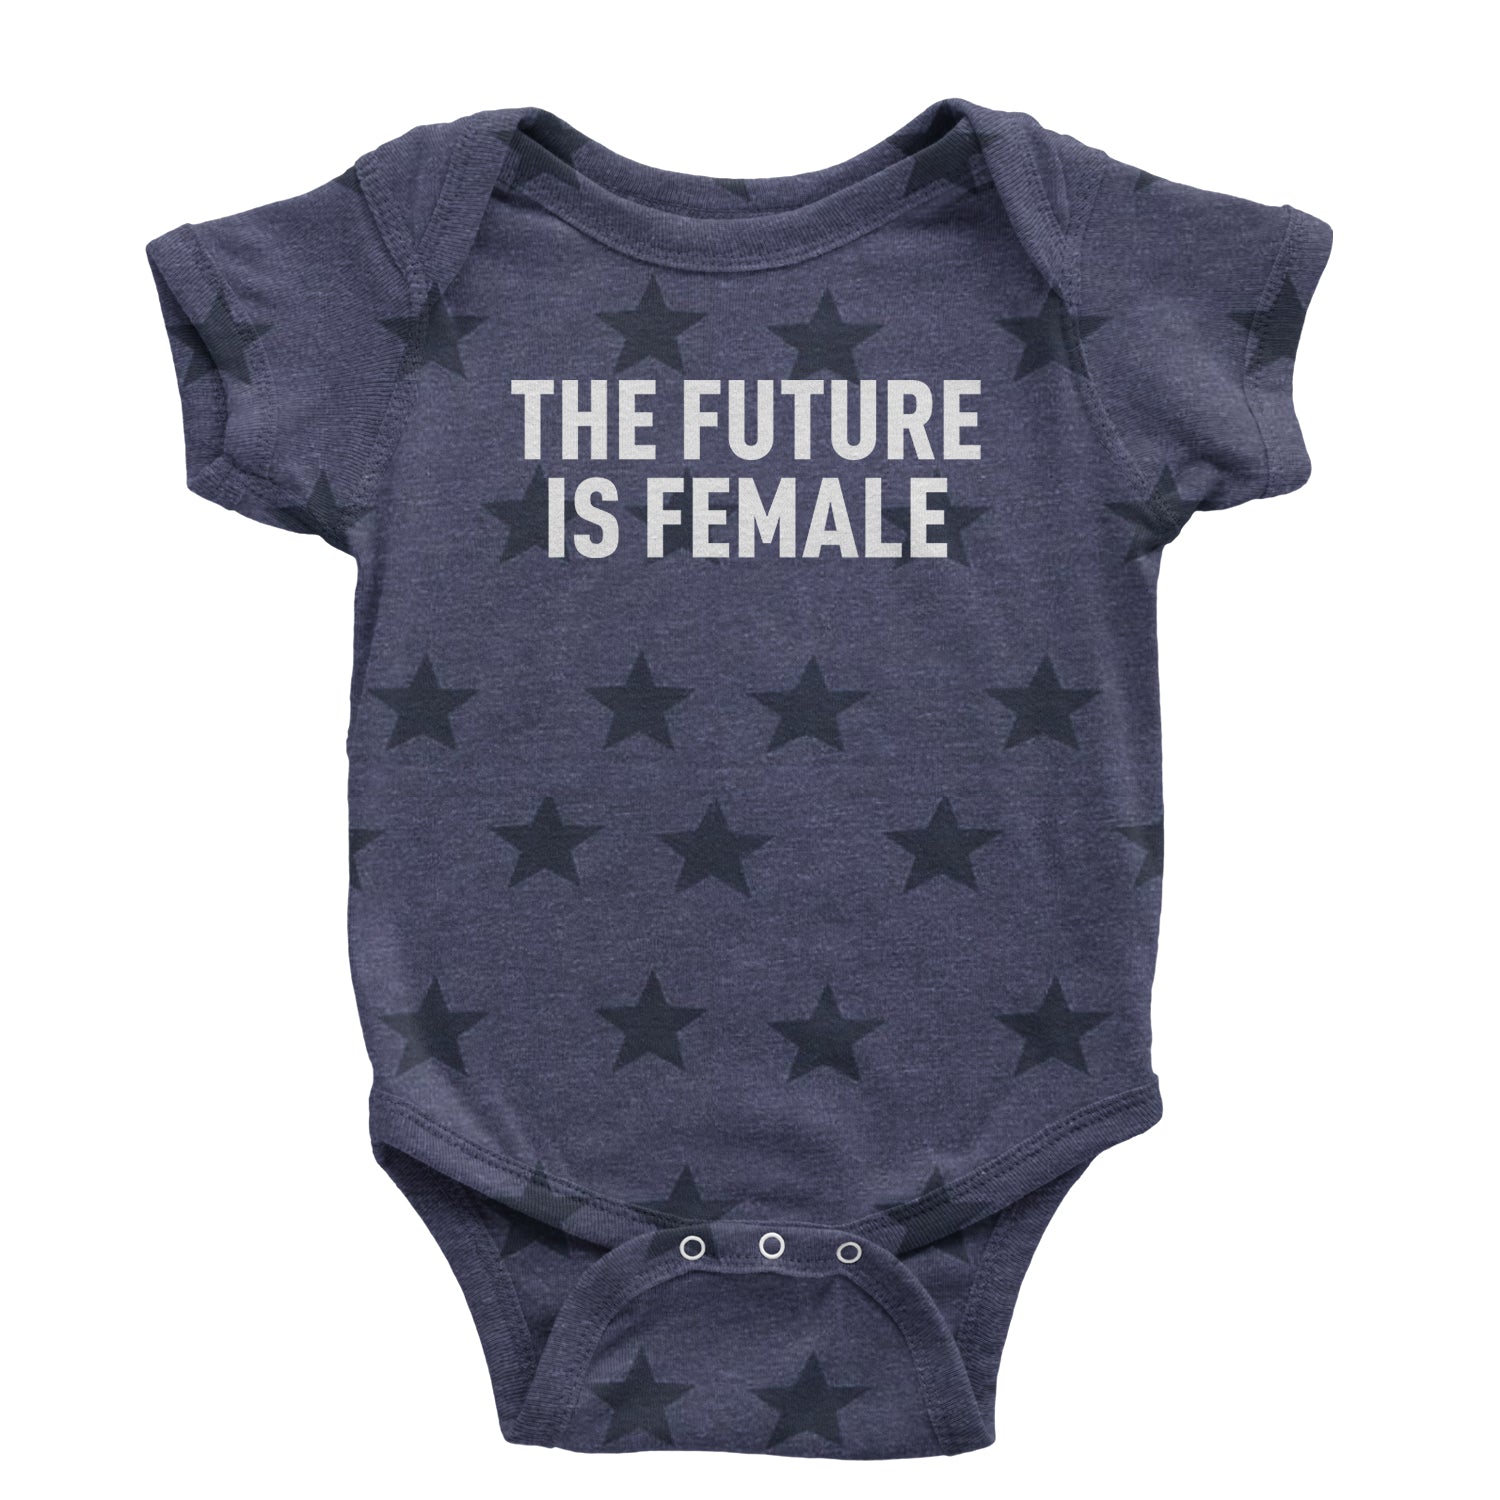 The Future Is Female Feminism Infant One-Piece Romper Bodysuit and Toddler T-shirt female, feminism, feminist, femme, future, is, liberation, suffrage, the by Expression Tees